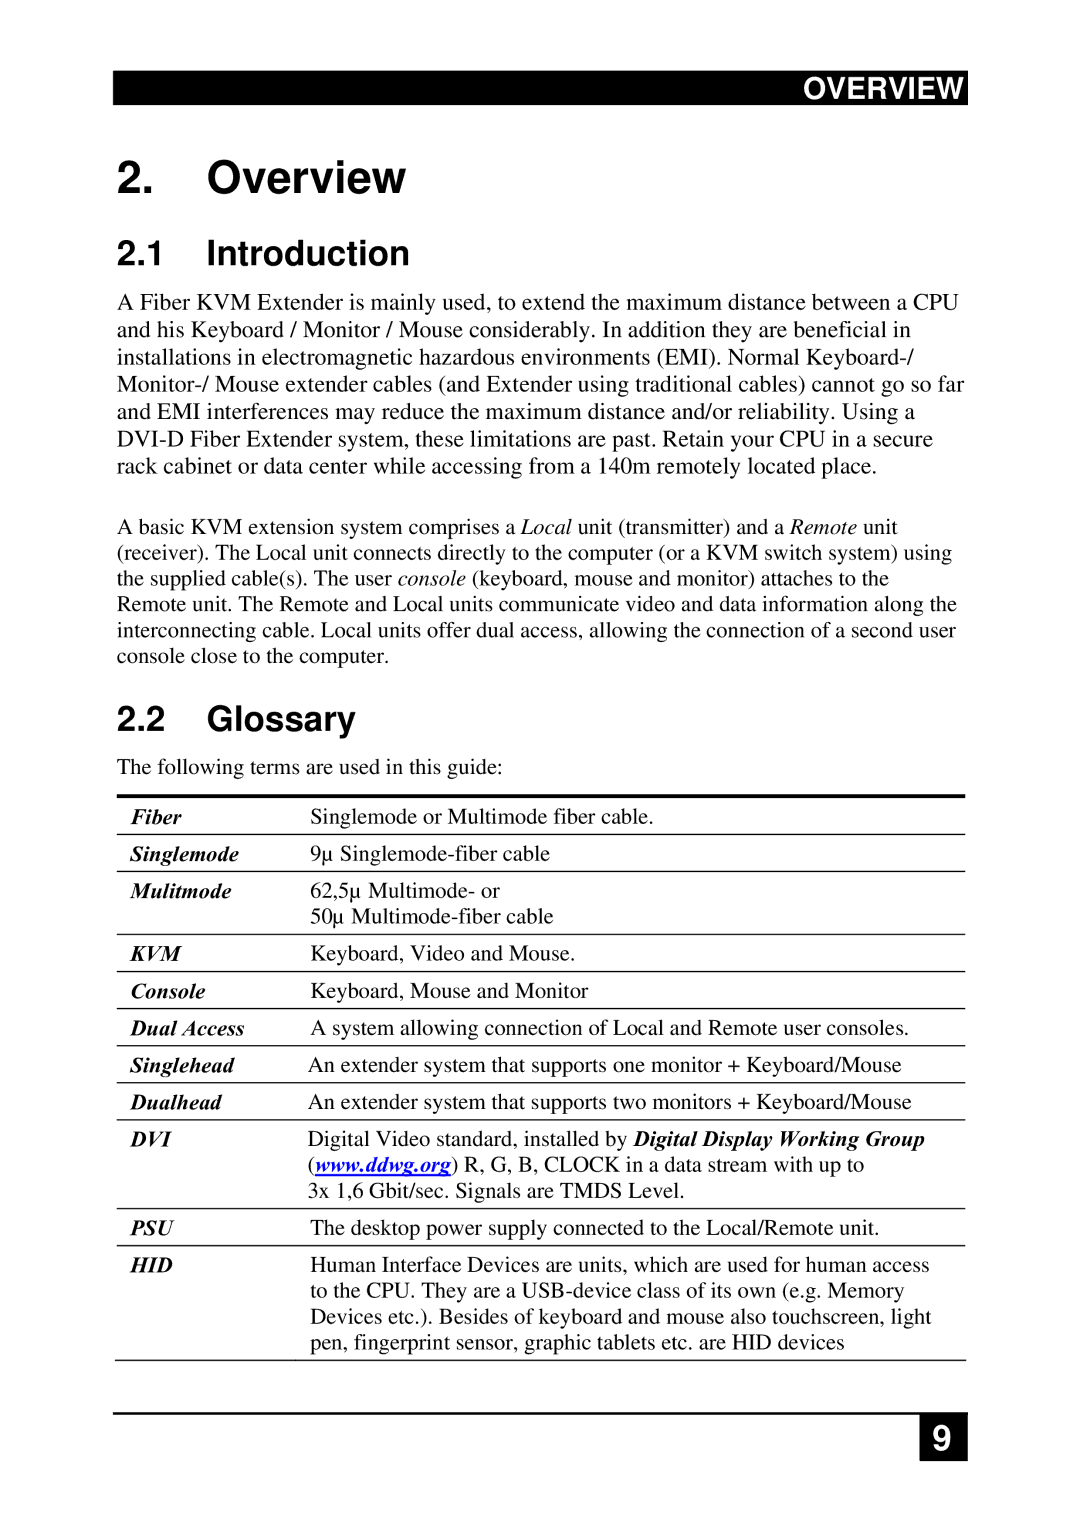 Black Box ACS4022A-R2-xx ACS4201A-R2-xx, ACS2009A-R2-xx, ACS4222A-R2-xx manual Introduction, Glossary 